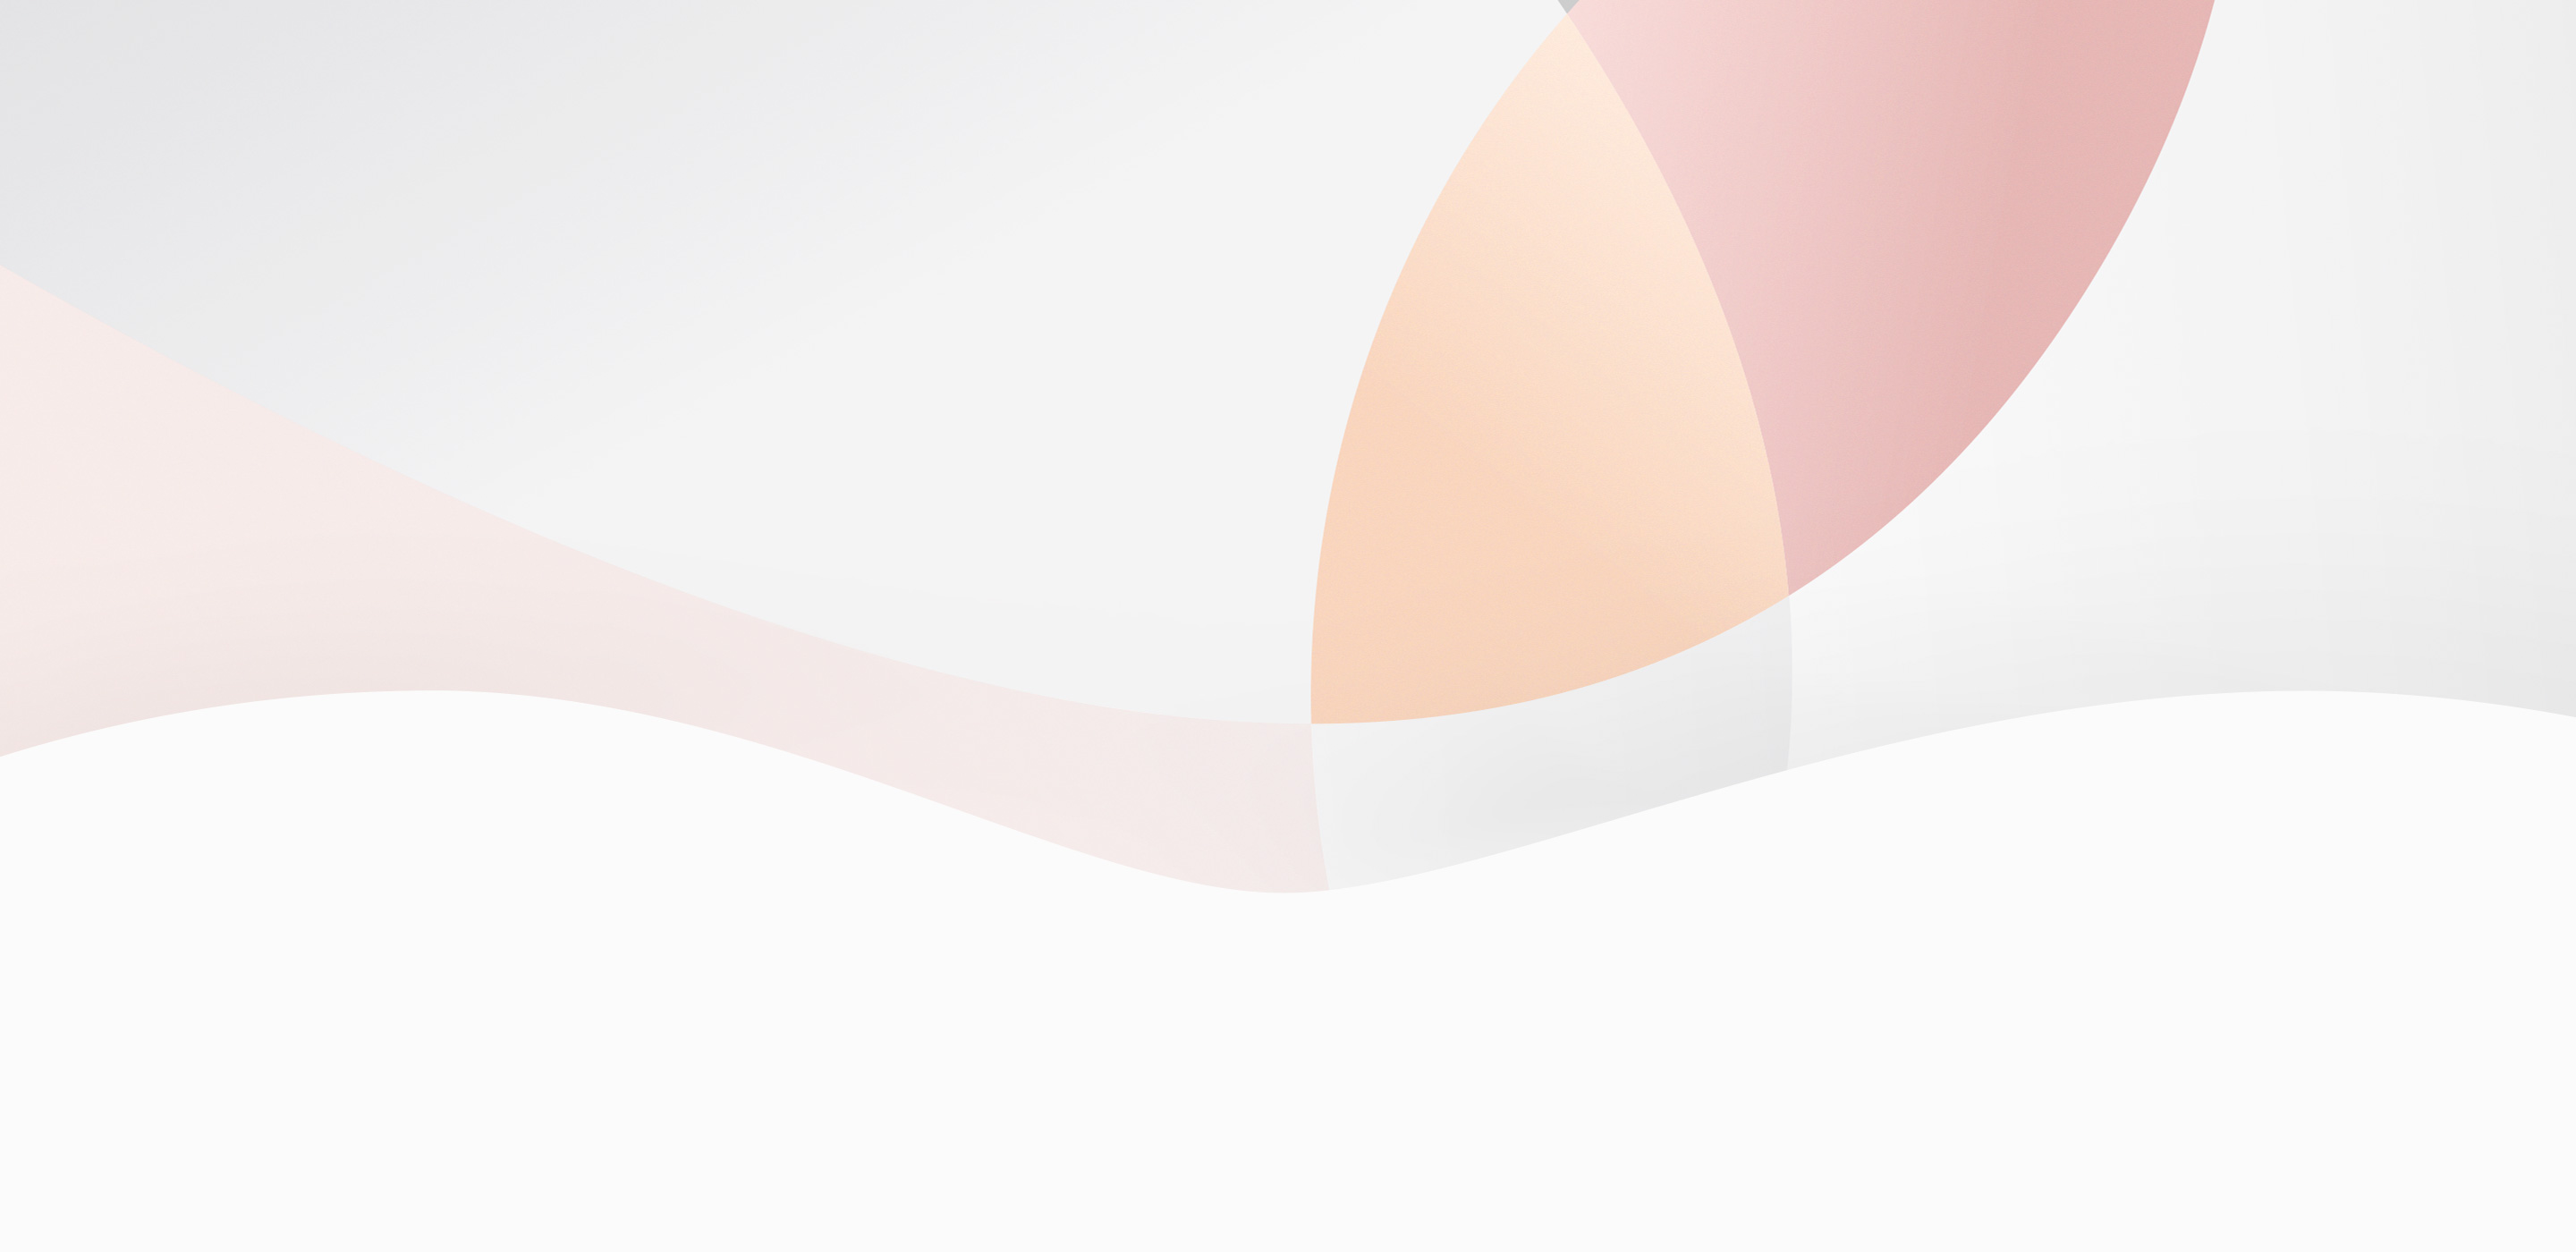 Apple 'Let us loop you in' event wallpapers for iPhone, iPad and Mac ...